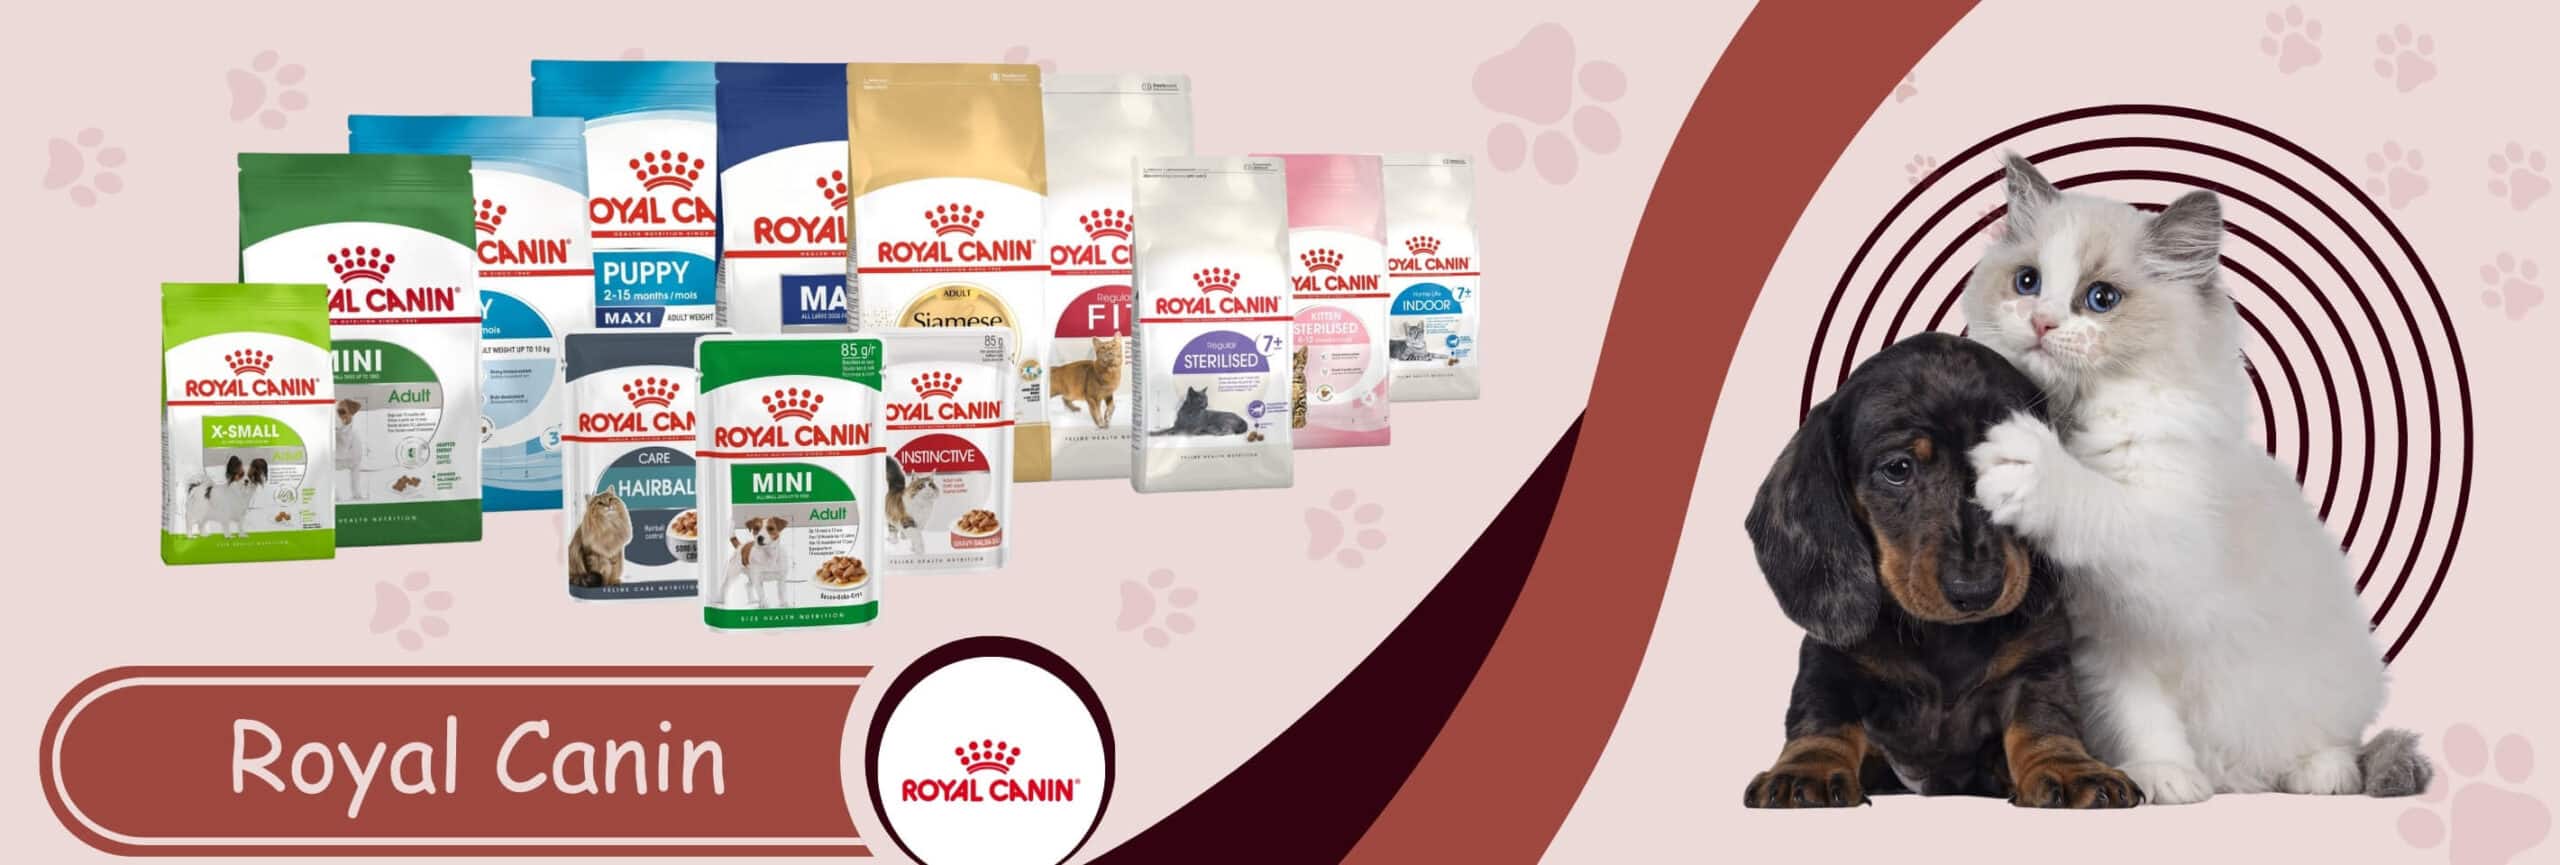 royal canin gamintojas scaled